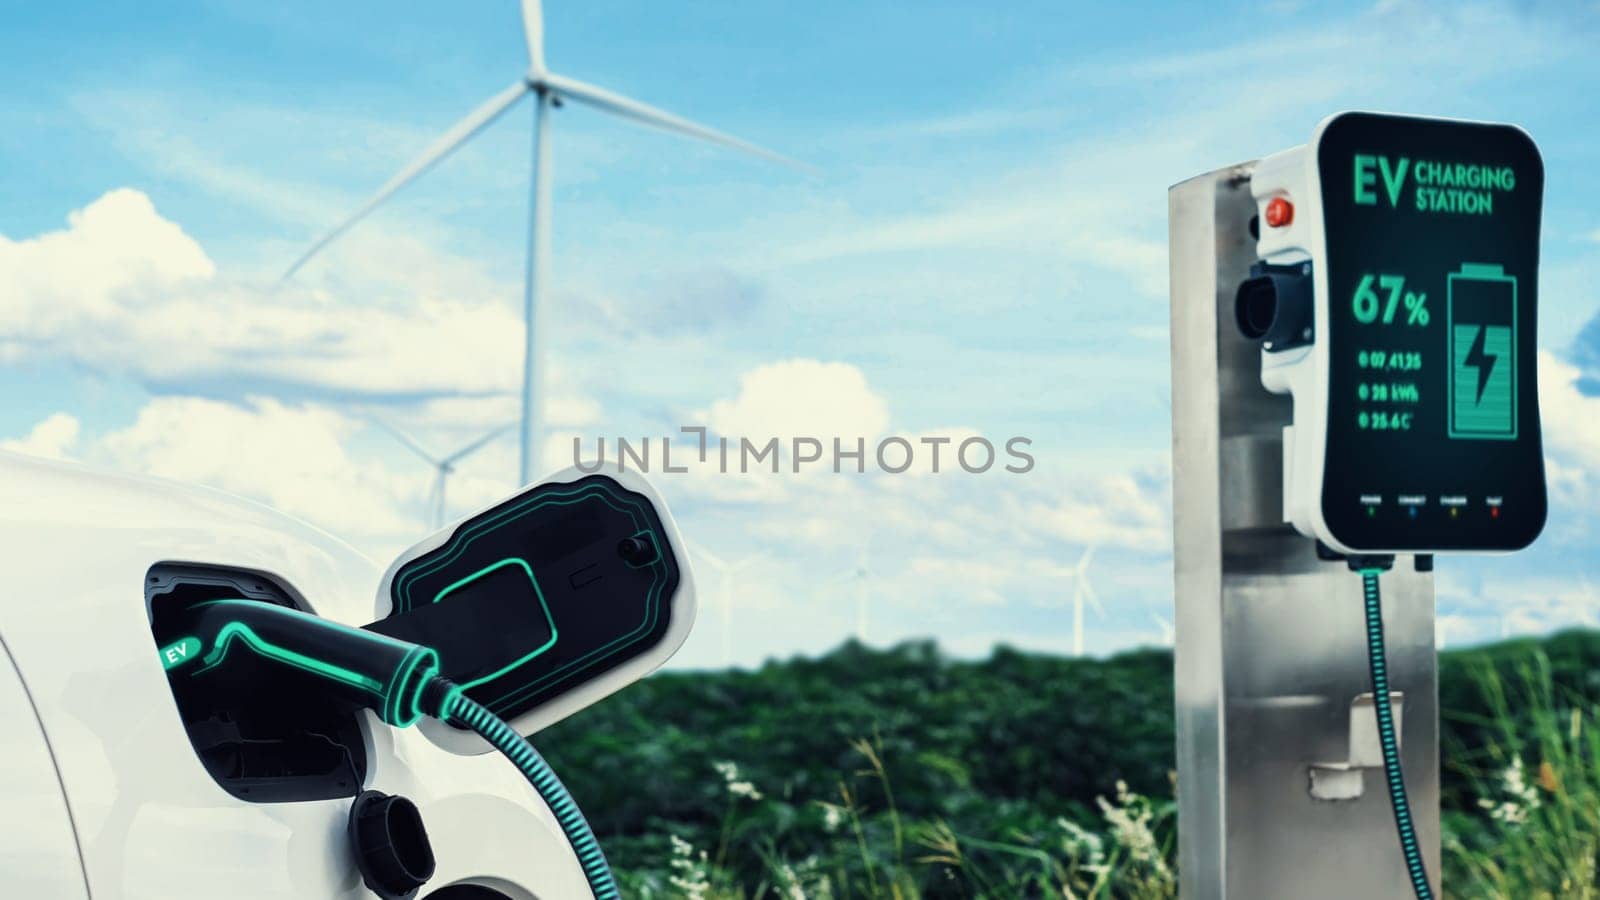 Electric car recharging energy from charging station by smart EV charger in wind turbine farm with nature outdoor background. Technological advance of alternative clean sustainable energy. Peruse